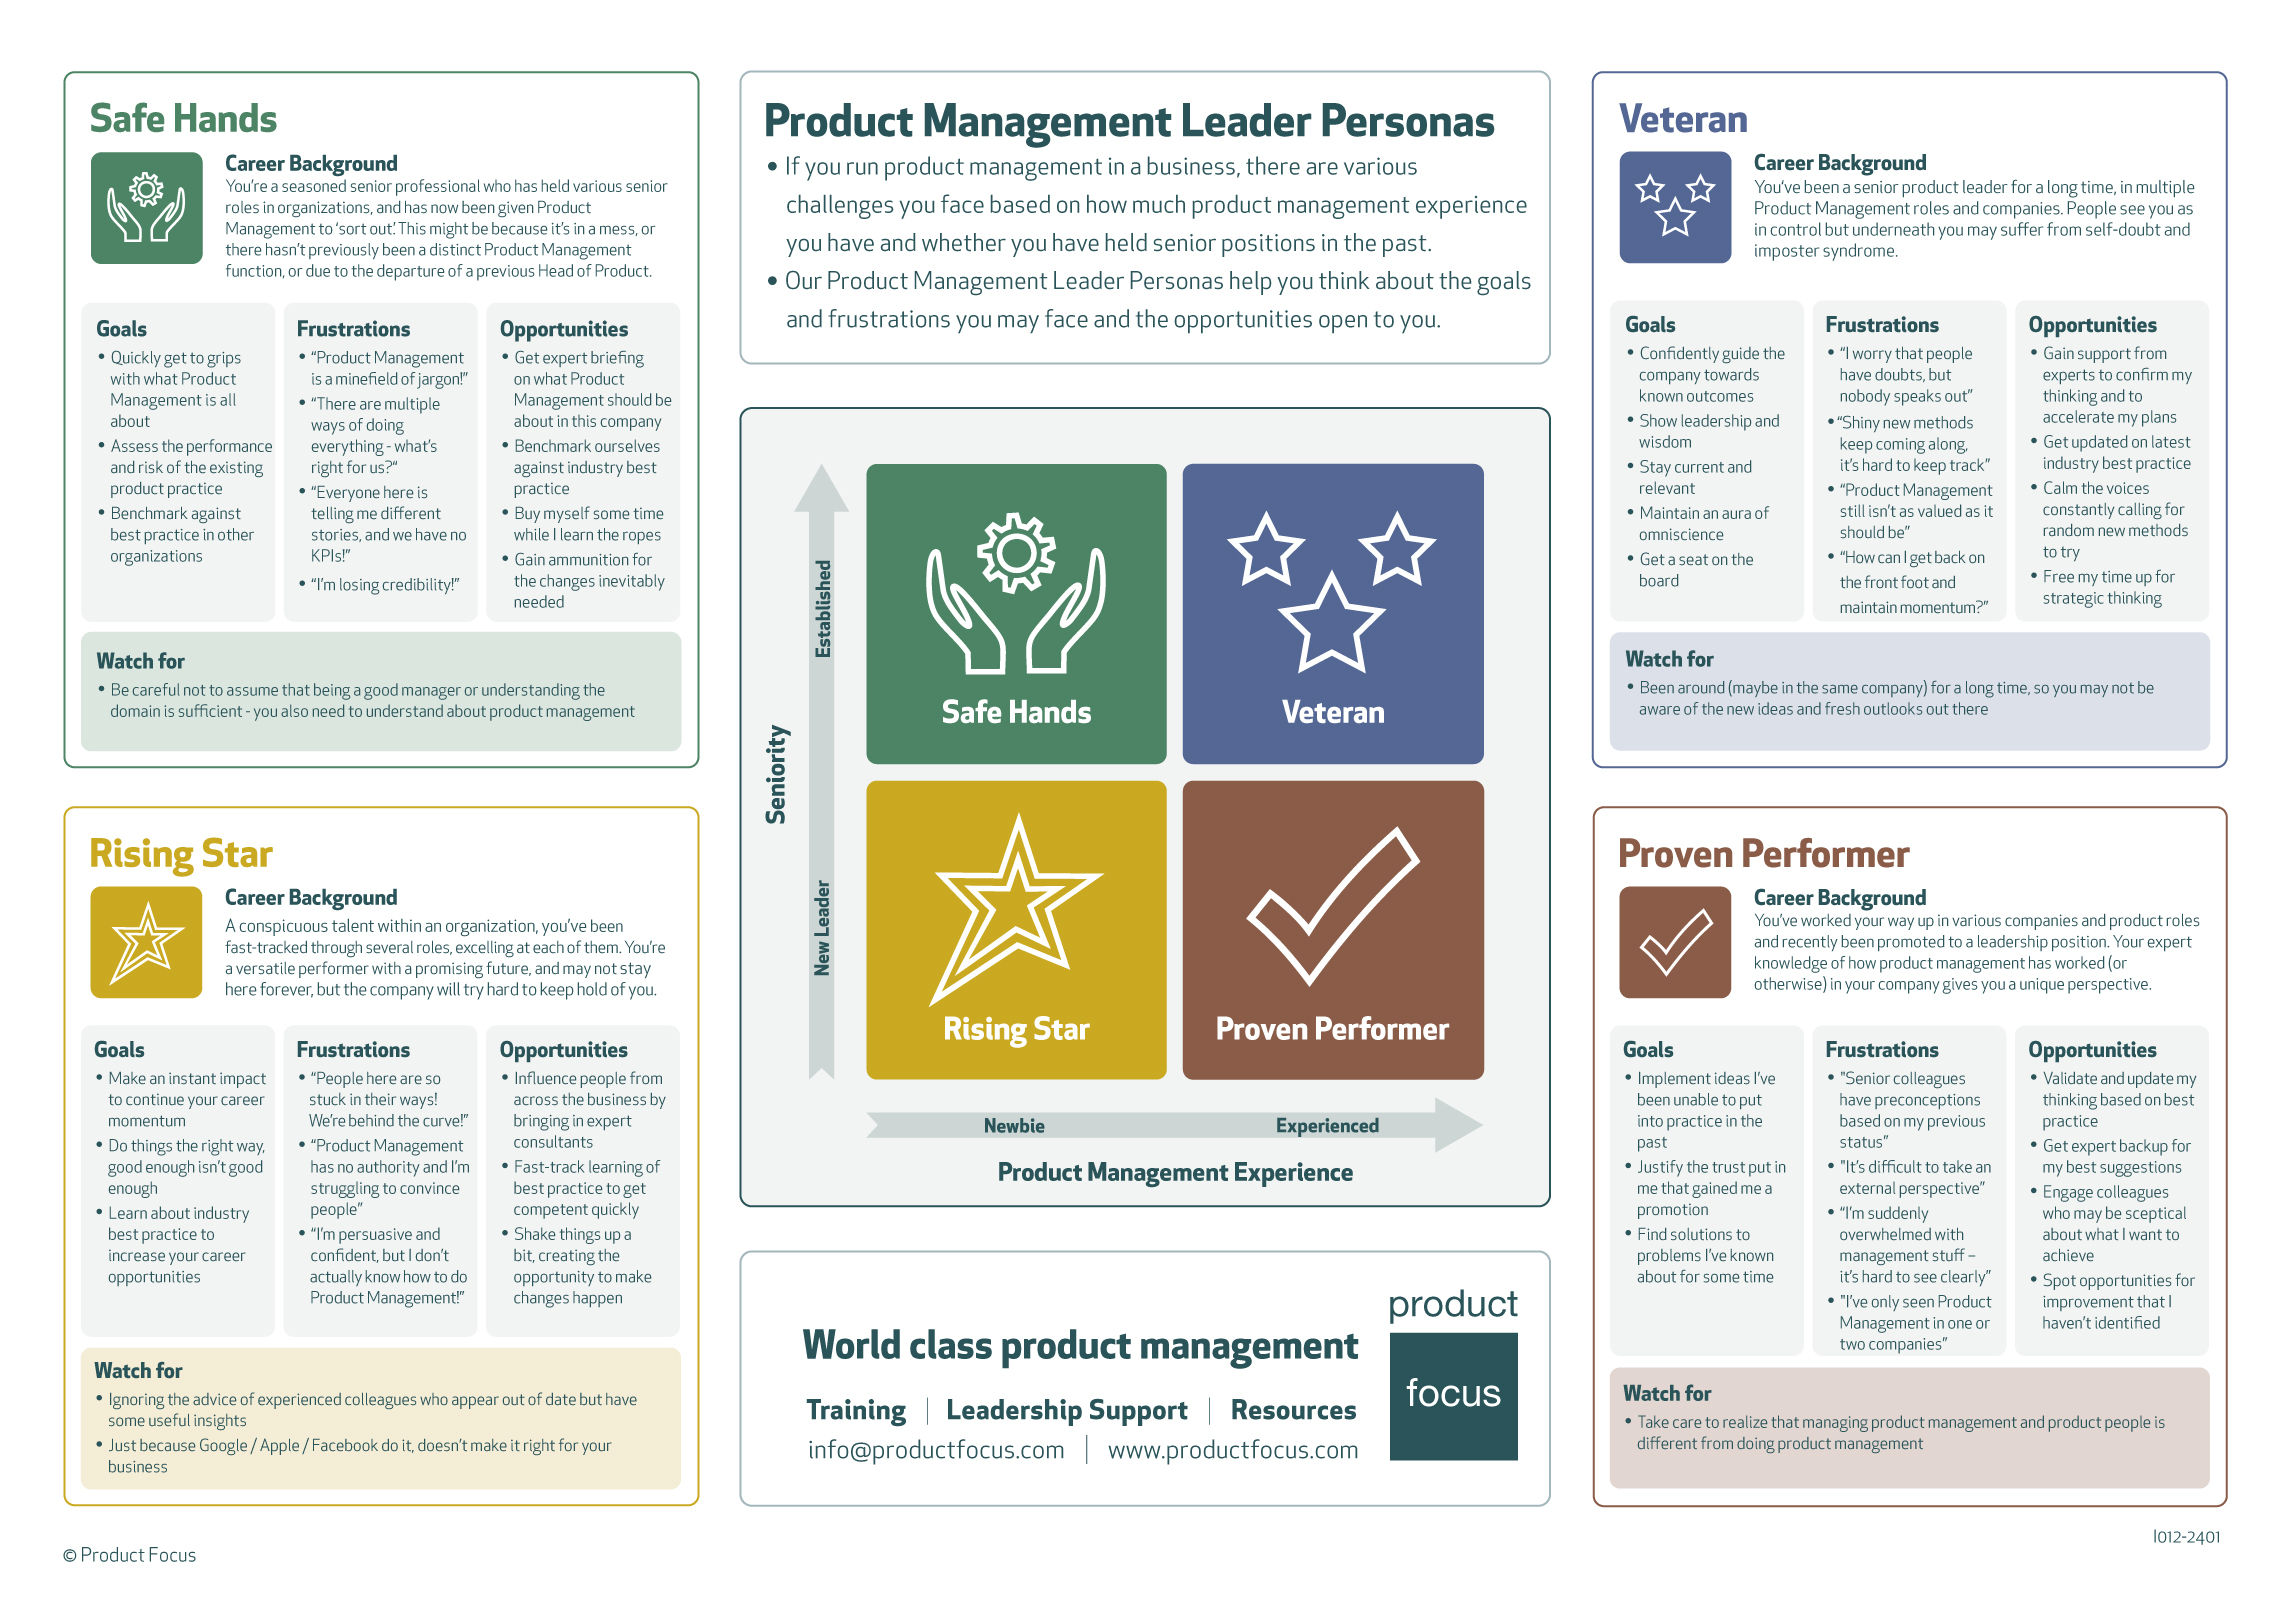 Product Management Leader Personas infographic